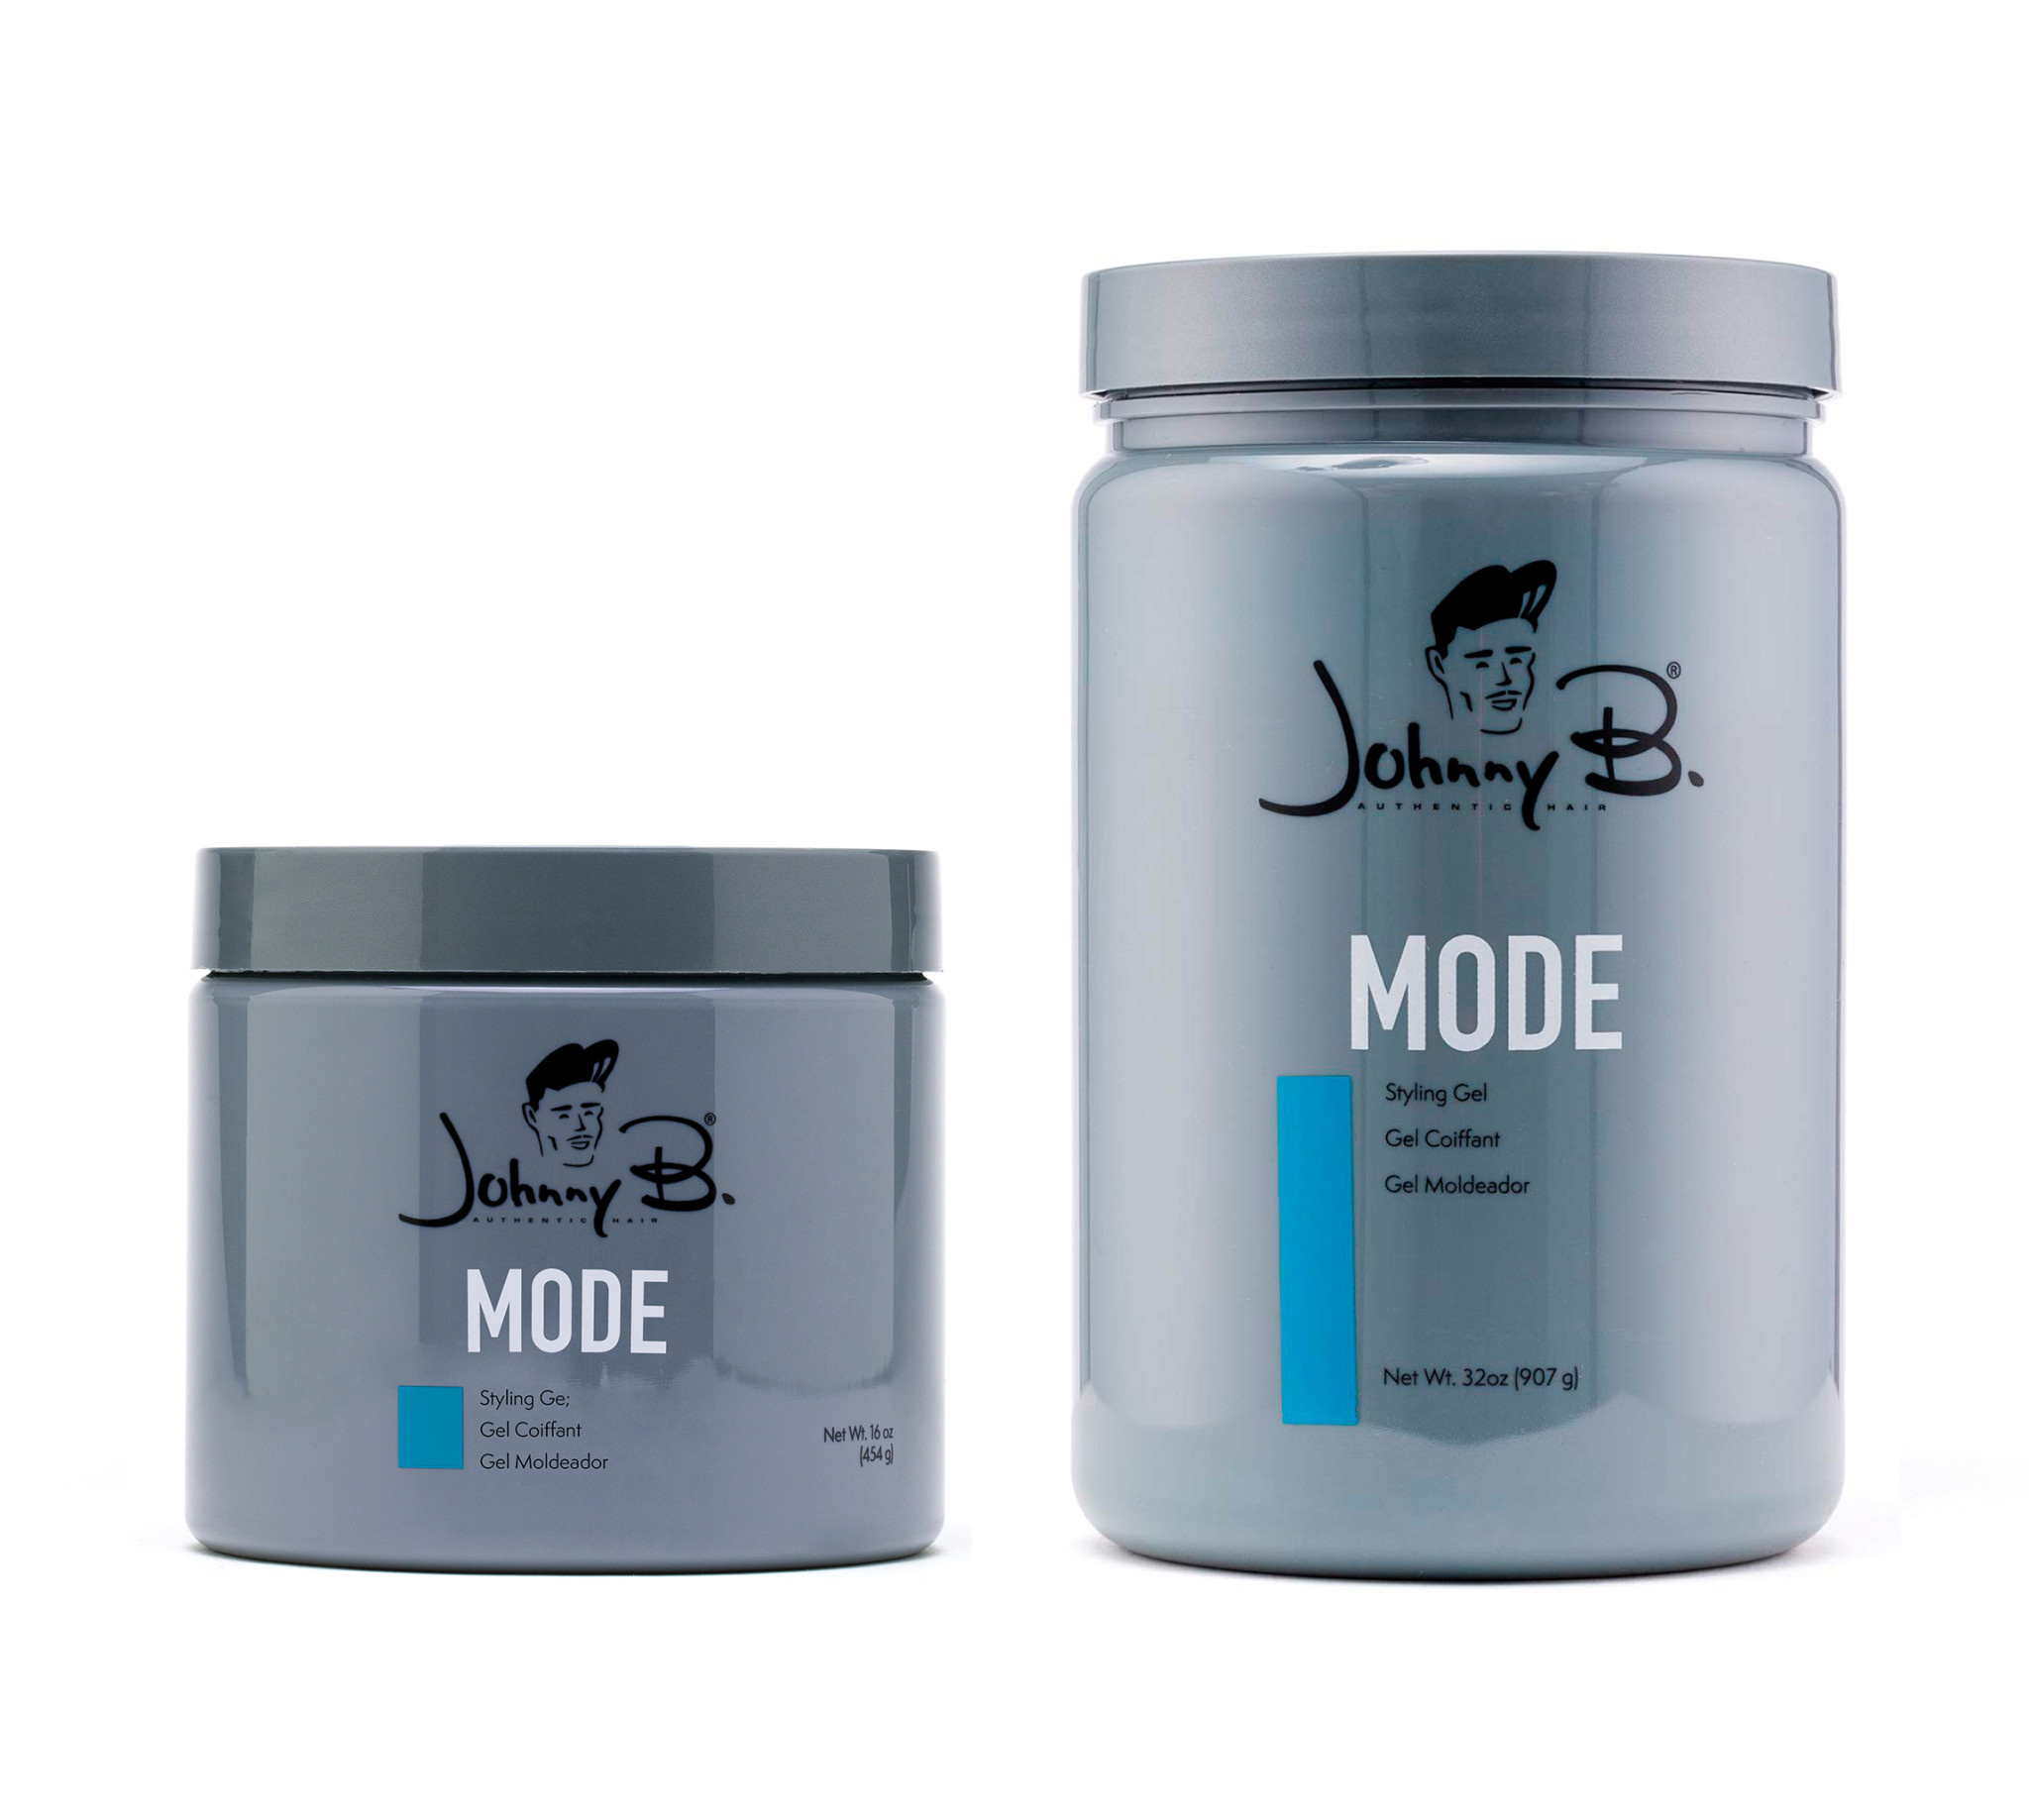 Johnny B Mode Styling Gel 6.7 Oz Brand New Packaging – Cuts On Time